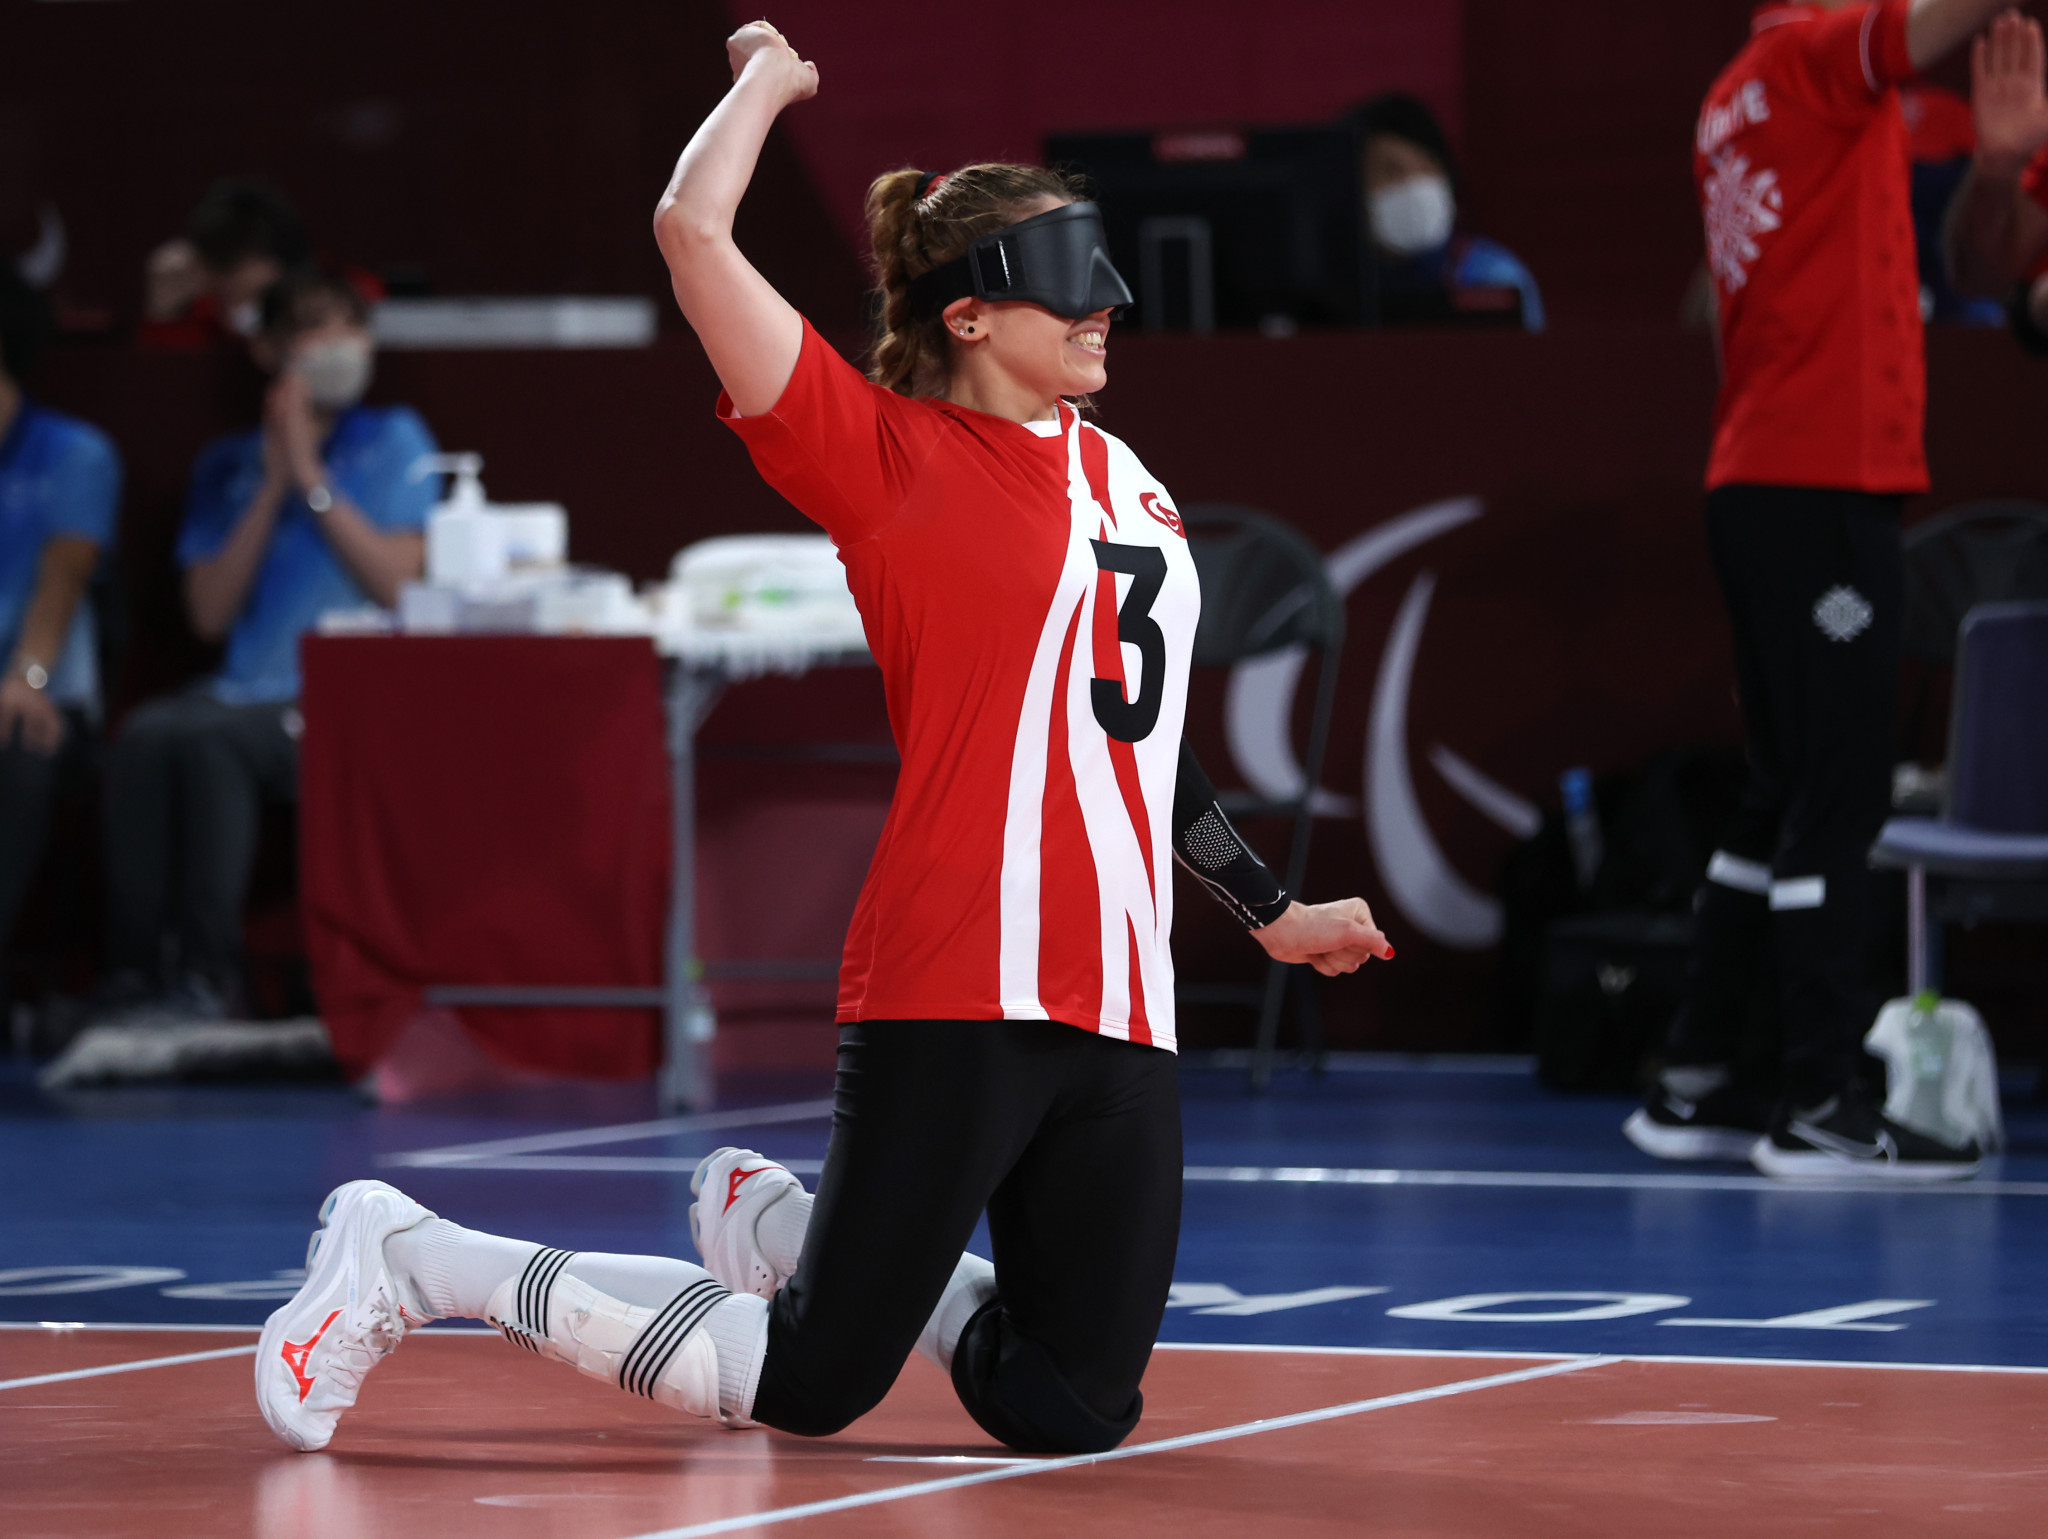 Turkey beat Russia as two of the favourites meet at the women's IBSA Goalball European A Championship